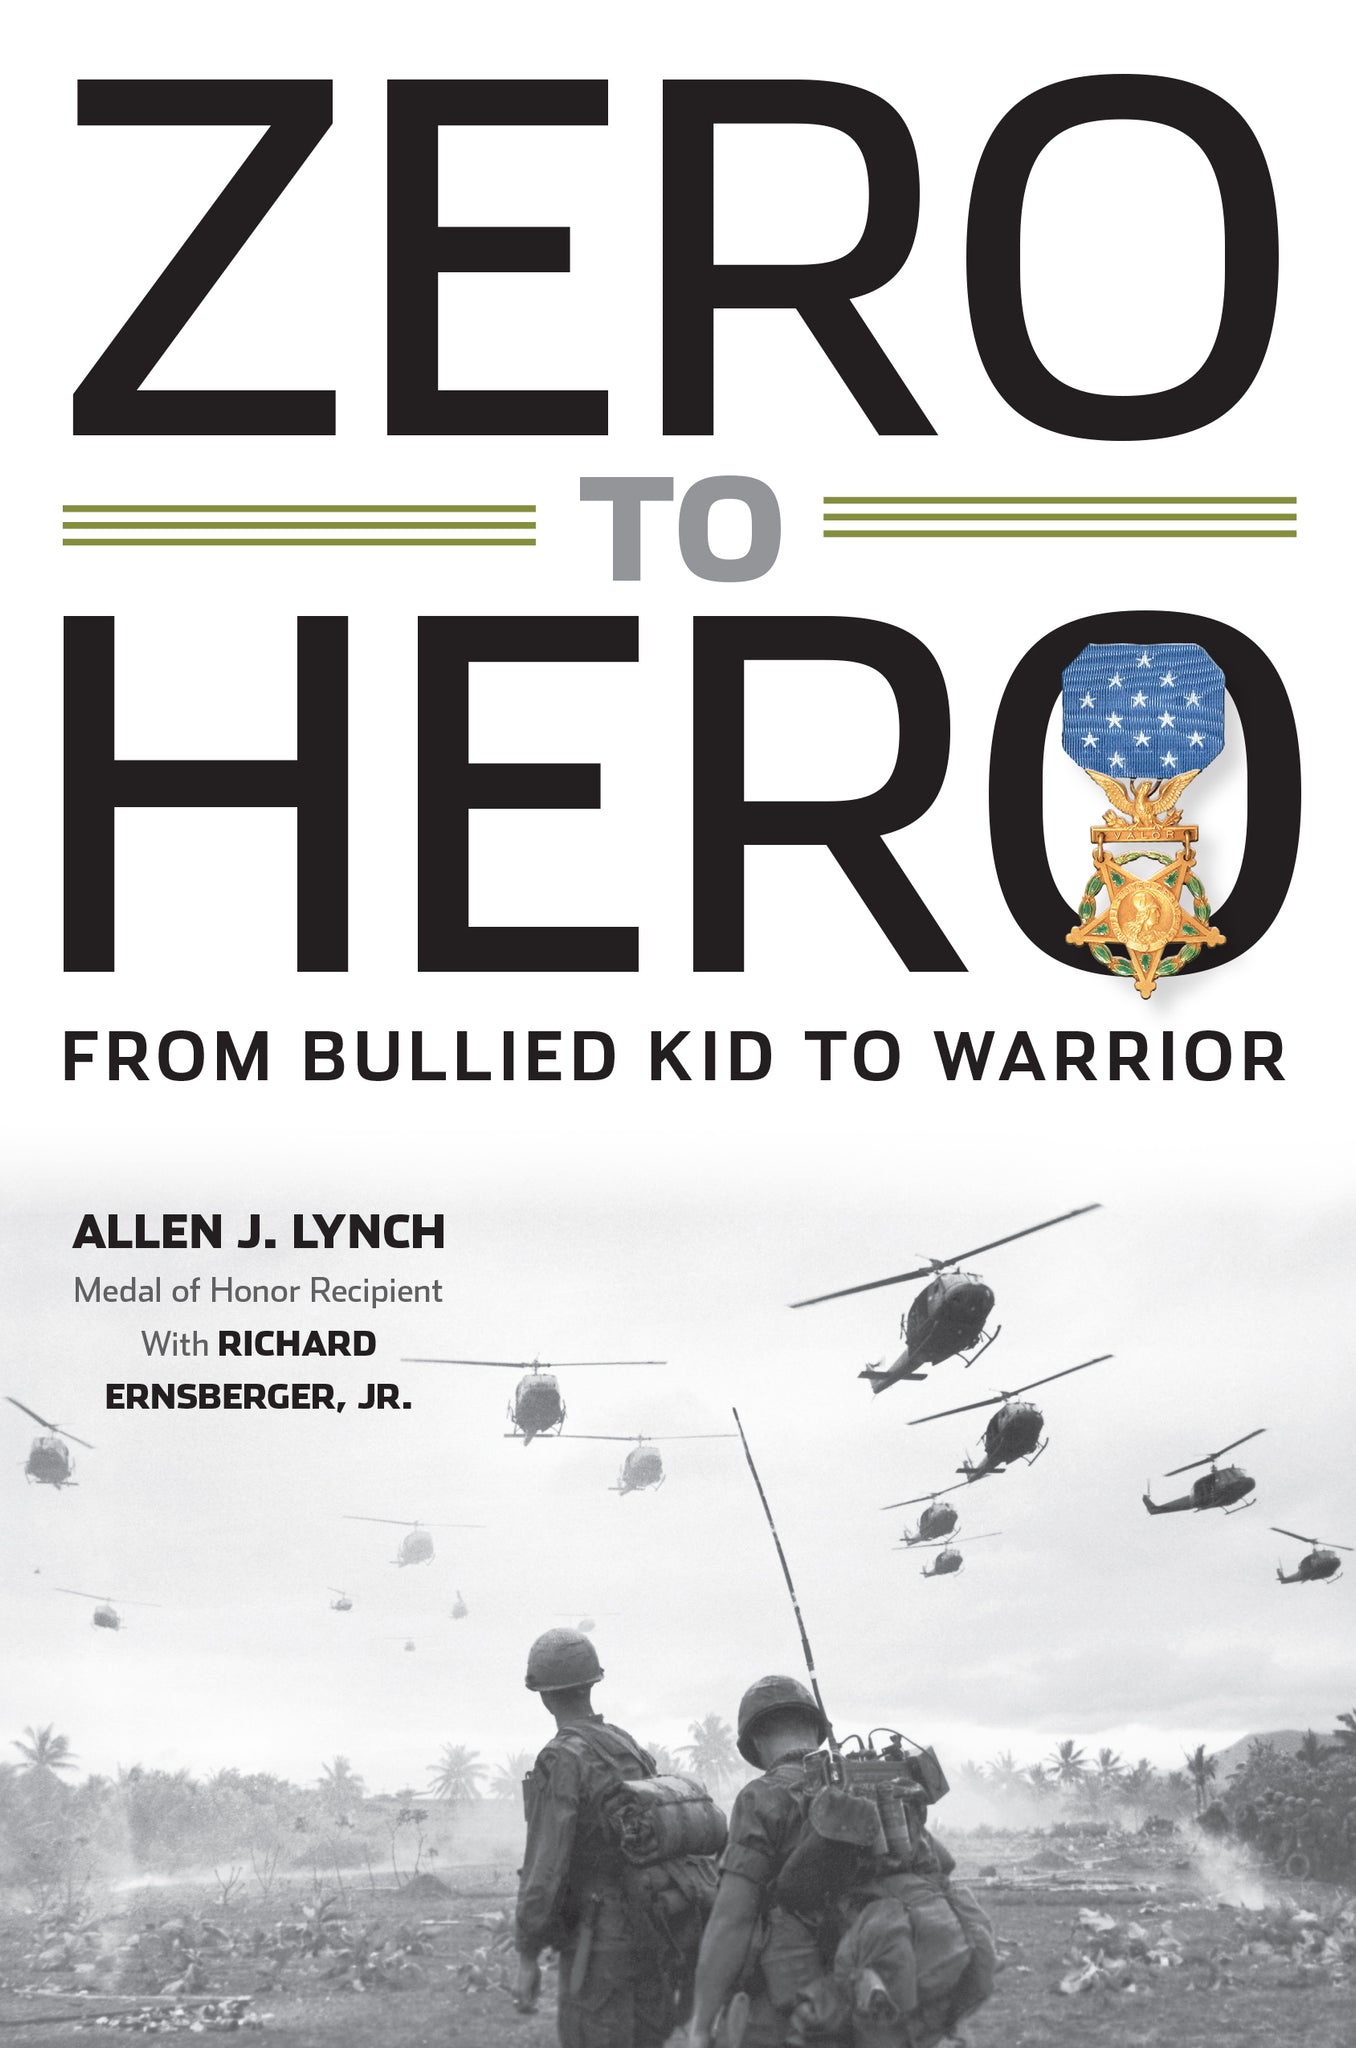 Zero to Hero: From Bullied Kid to Warrior by Allen J. Lynch and Richard Ernsberger Jr.